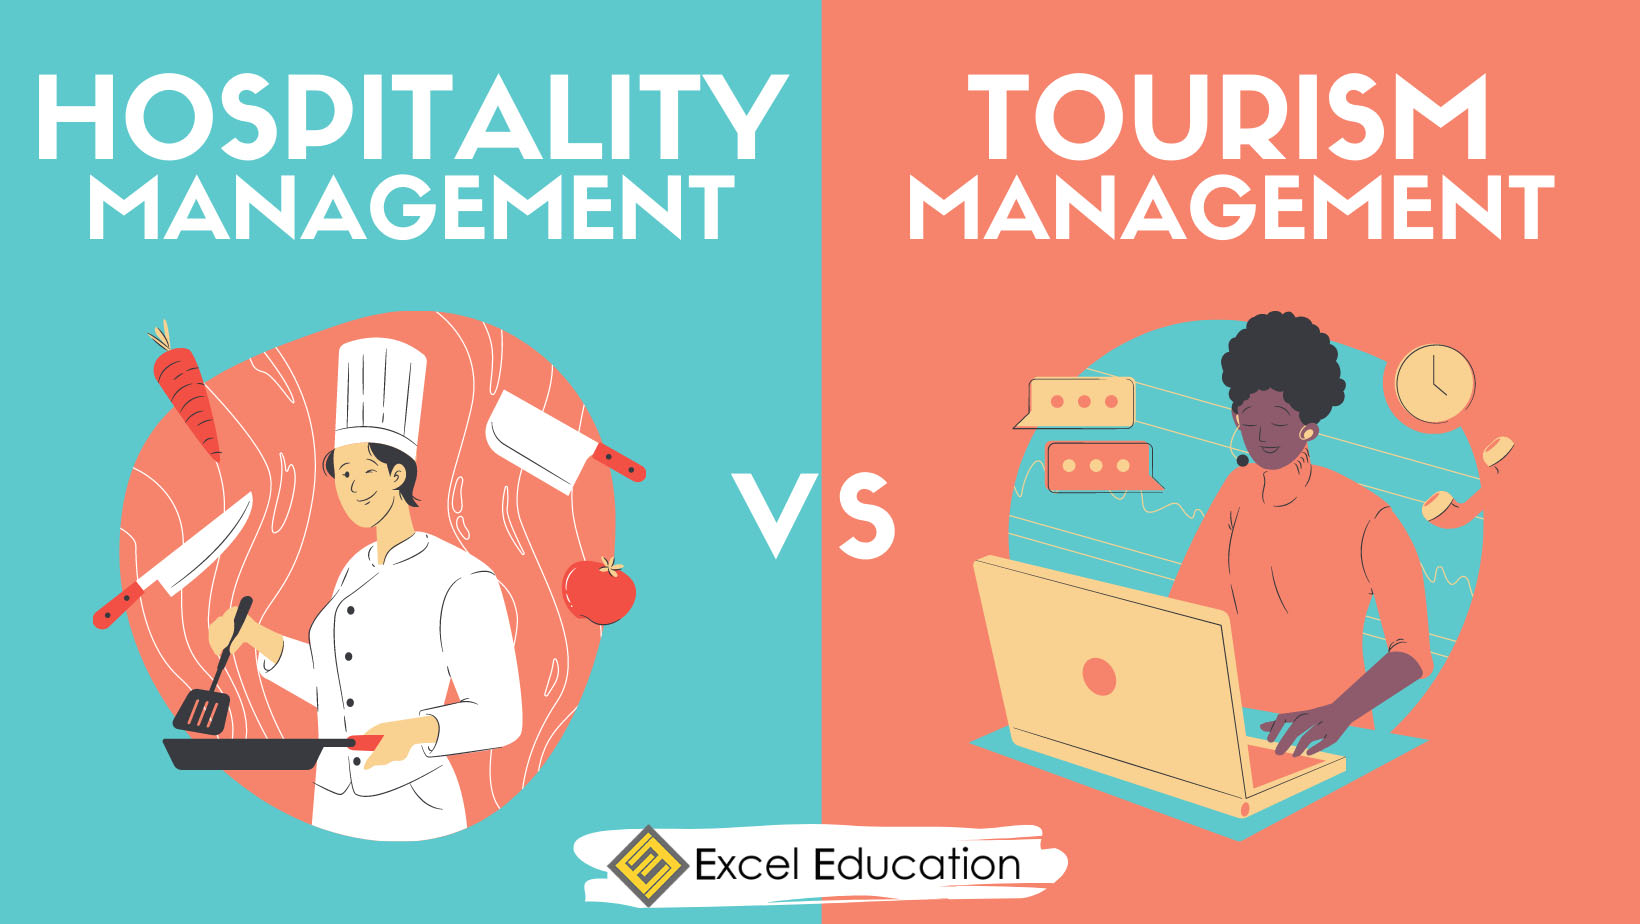 about tourism and hospitality management